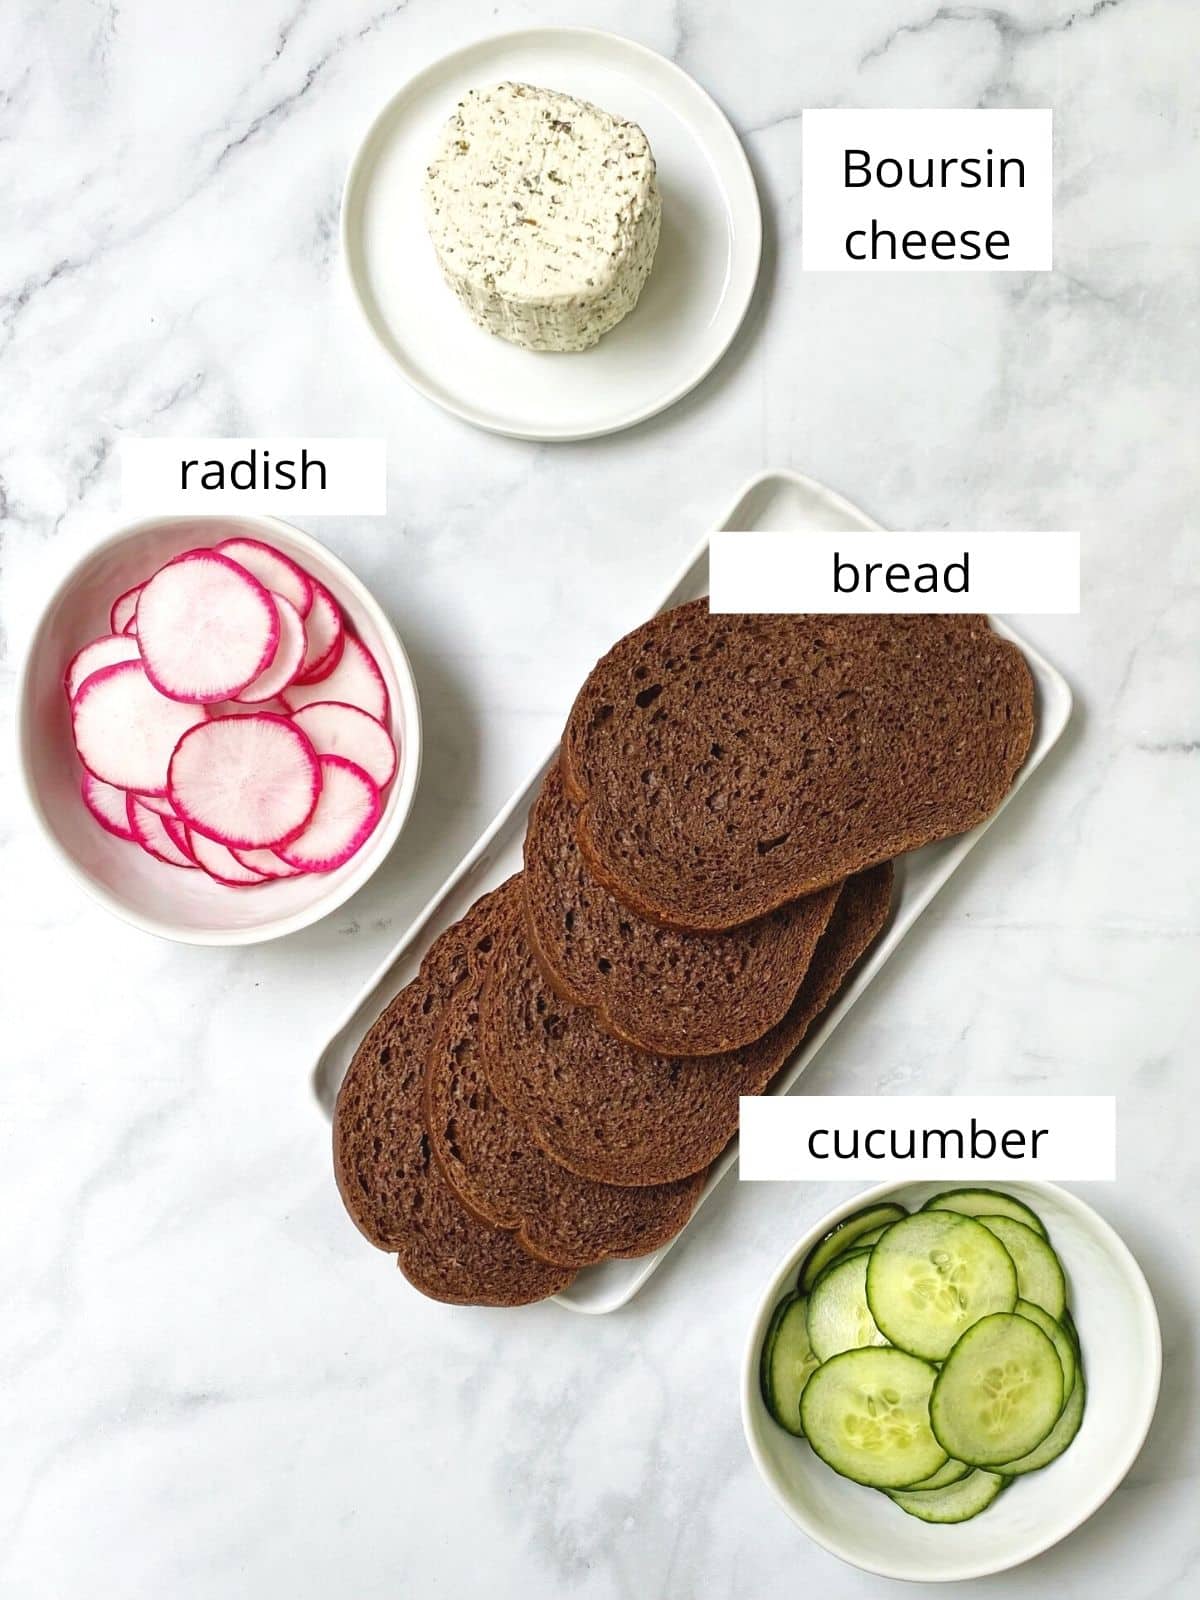 array of ingredients - bread, Boursin cheese, radish, and cucumber